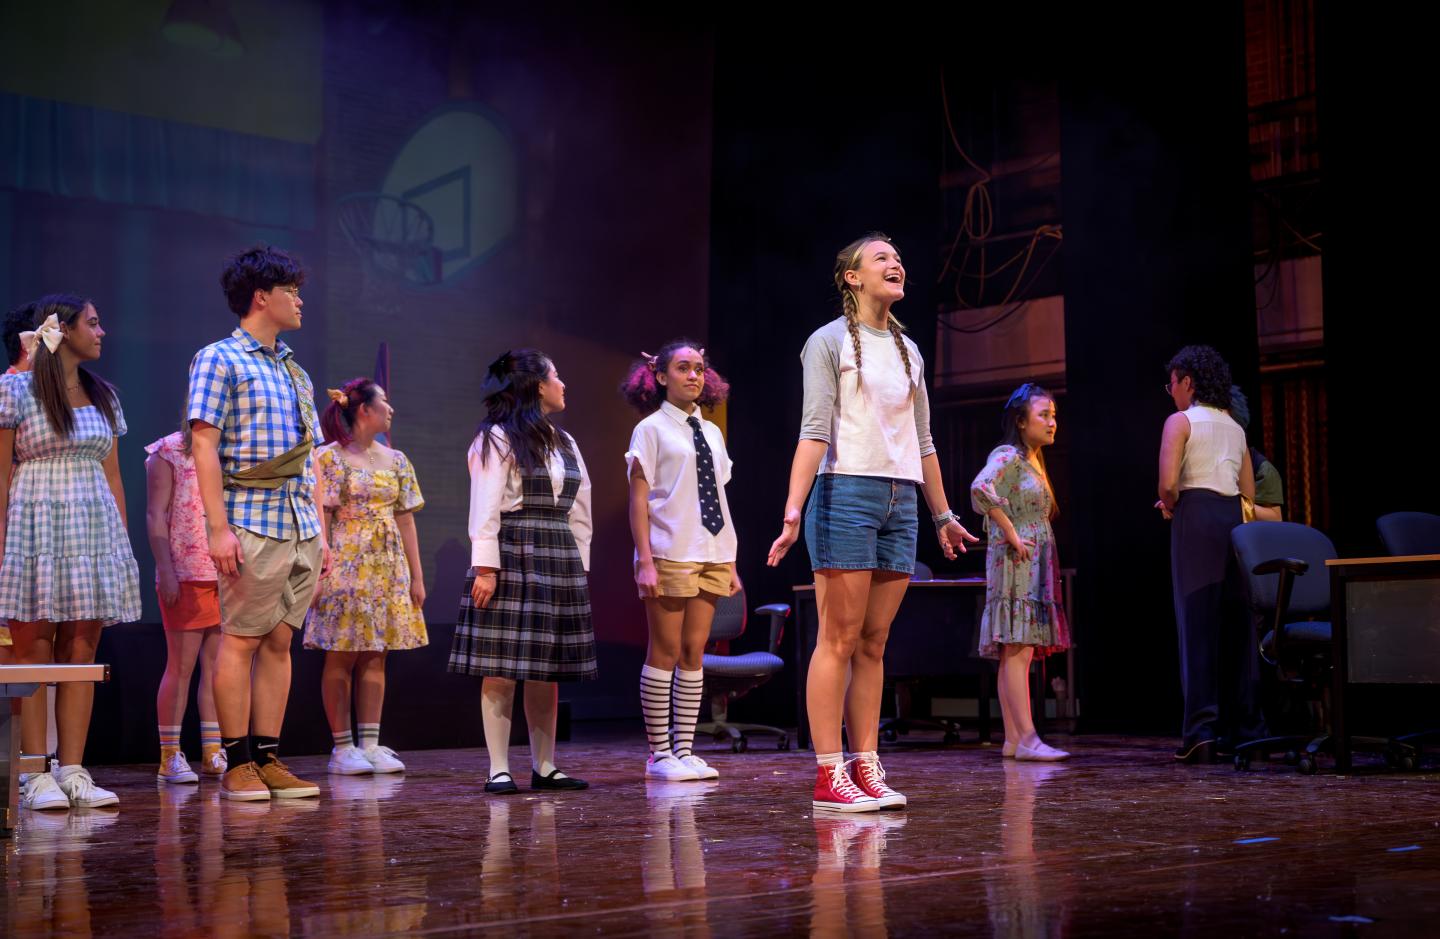 Students on-stage during the performance of "The 25th Annual Putnam County Spelling Bee"